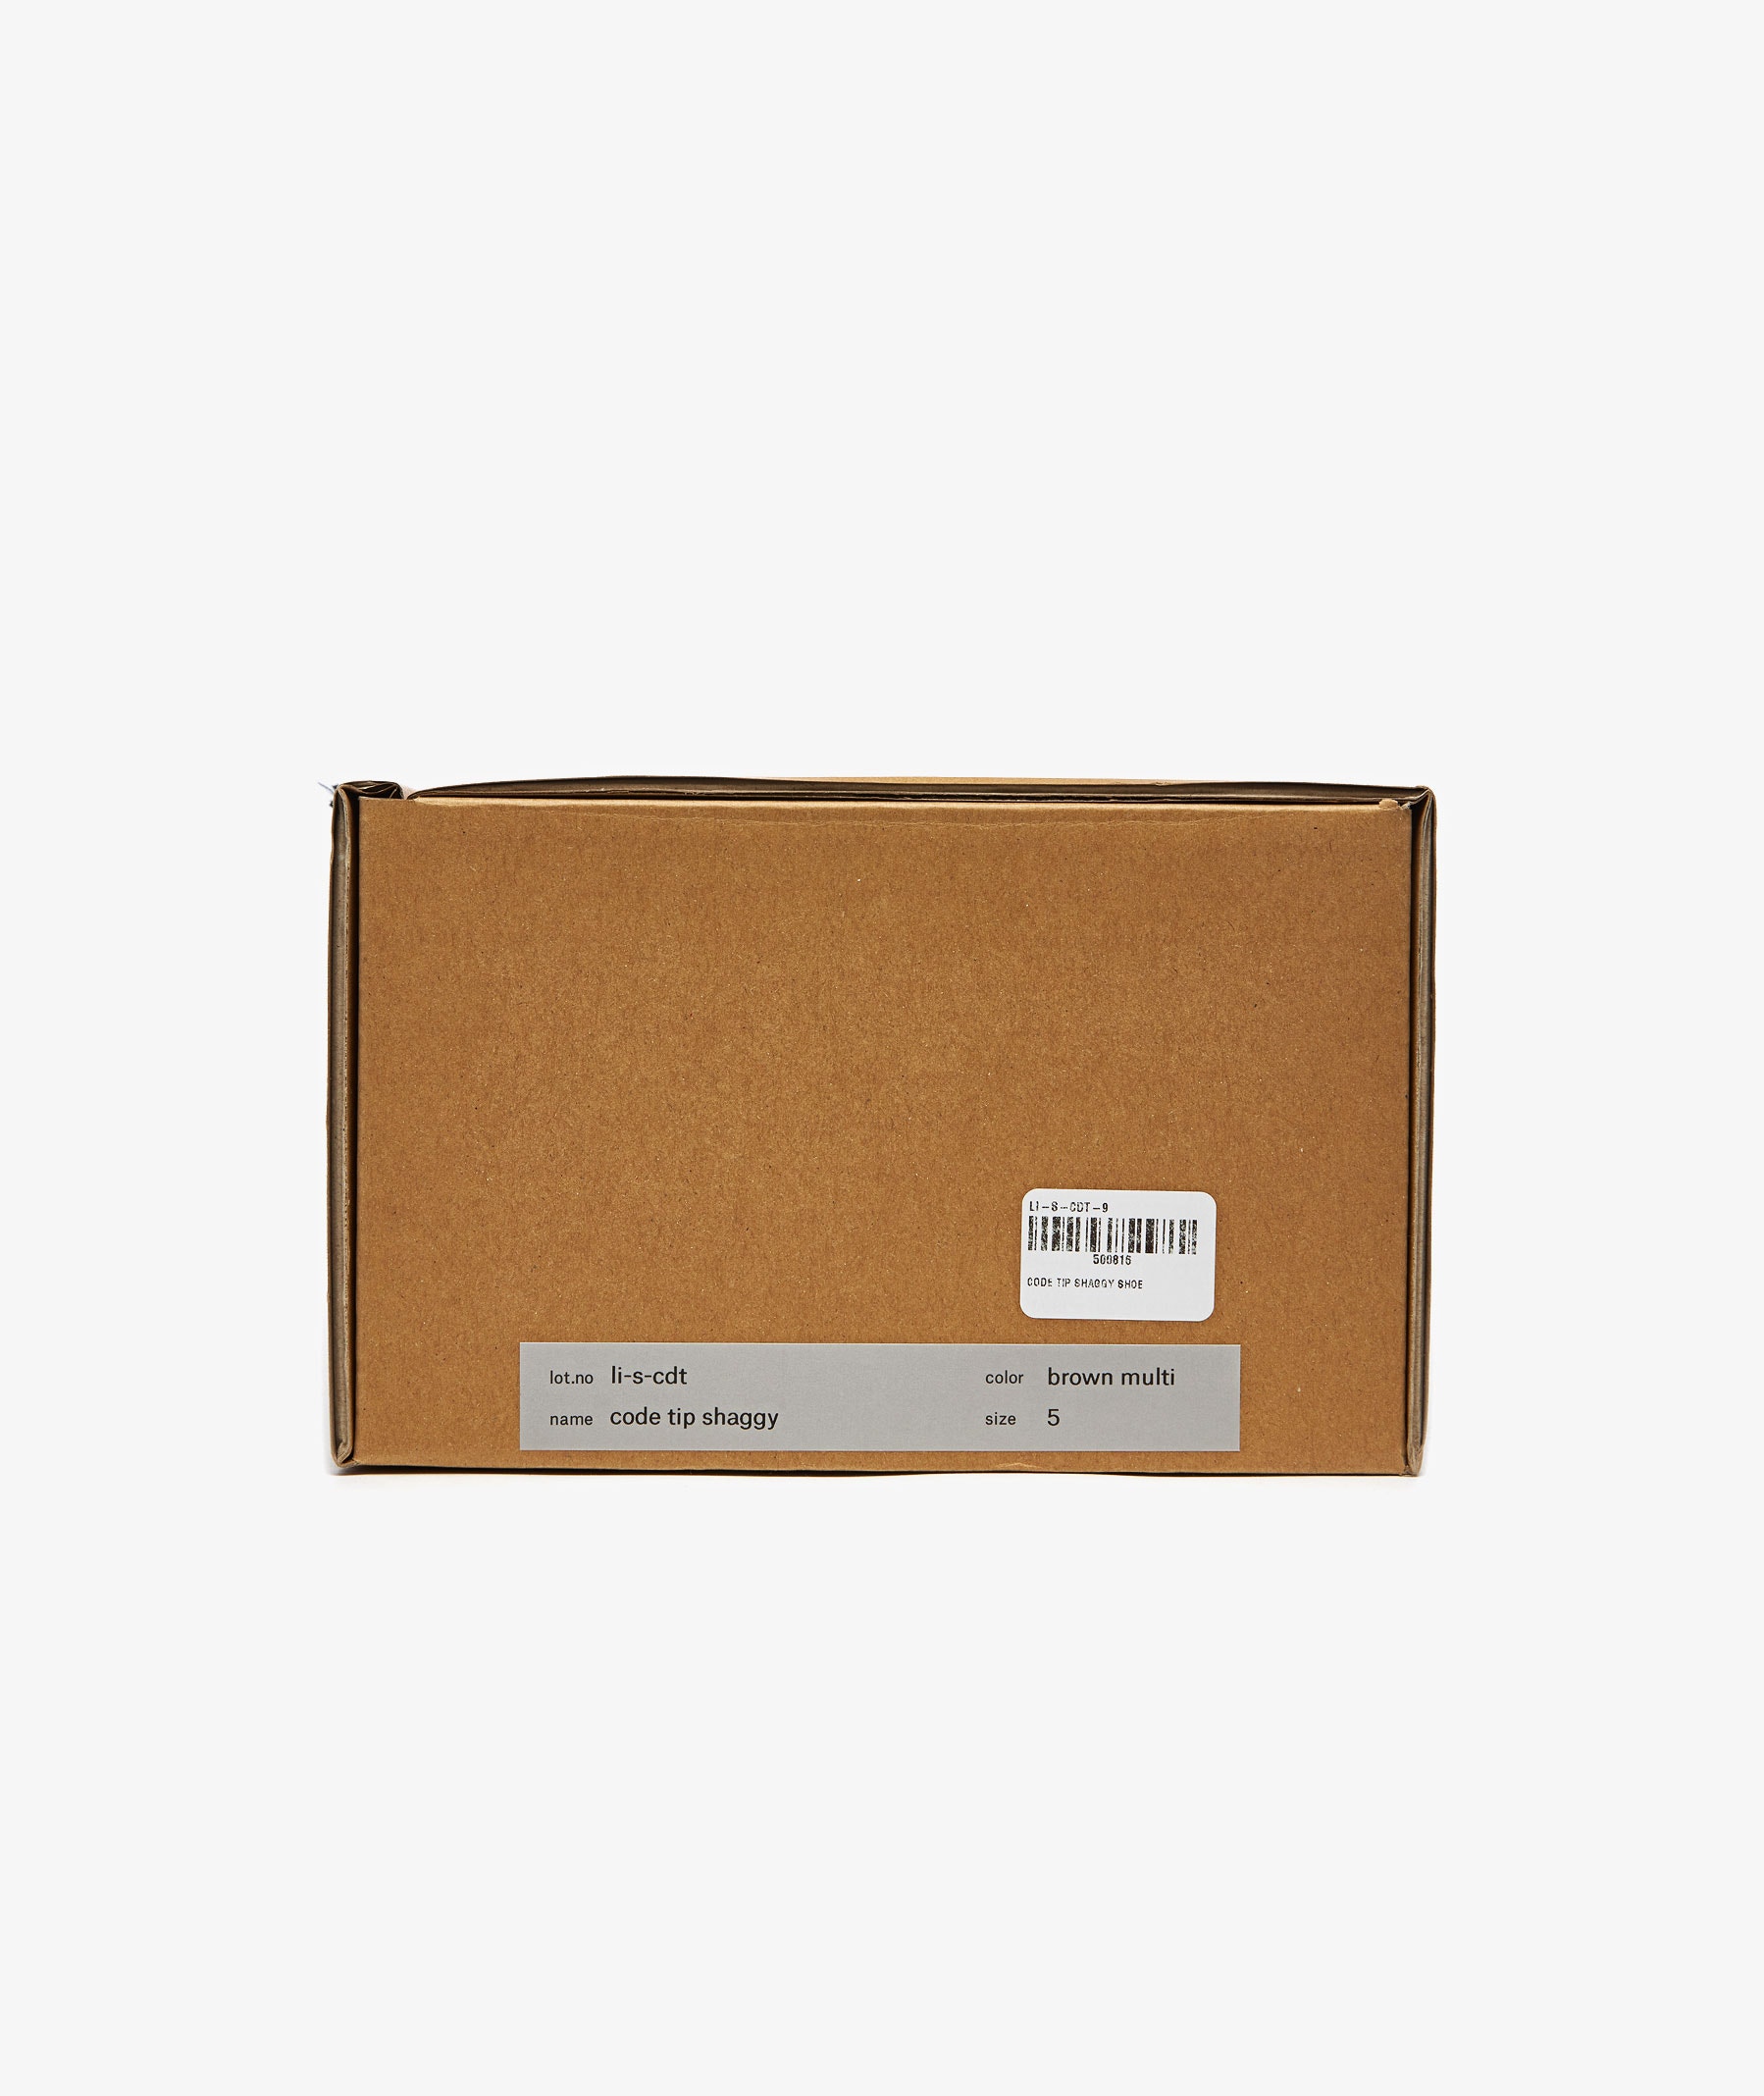 Online Hender Scheme Code Tip Shaggy Shoes at a reasonable price